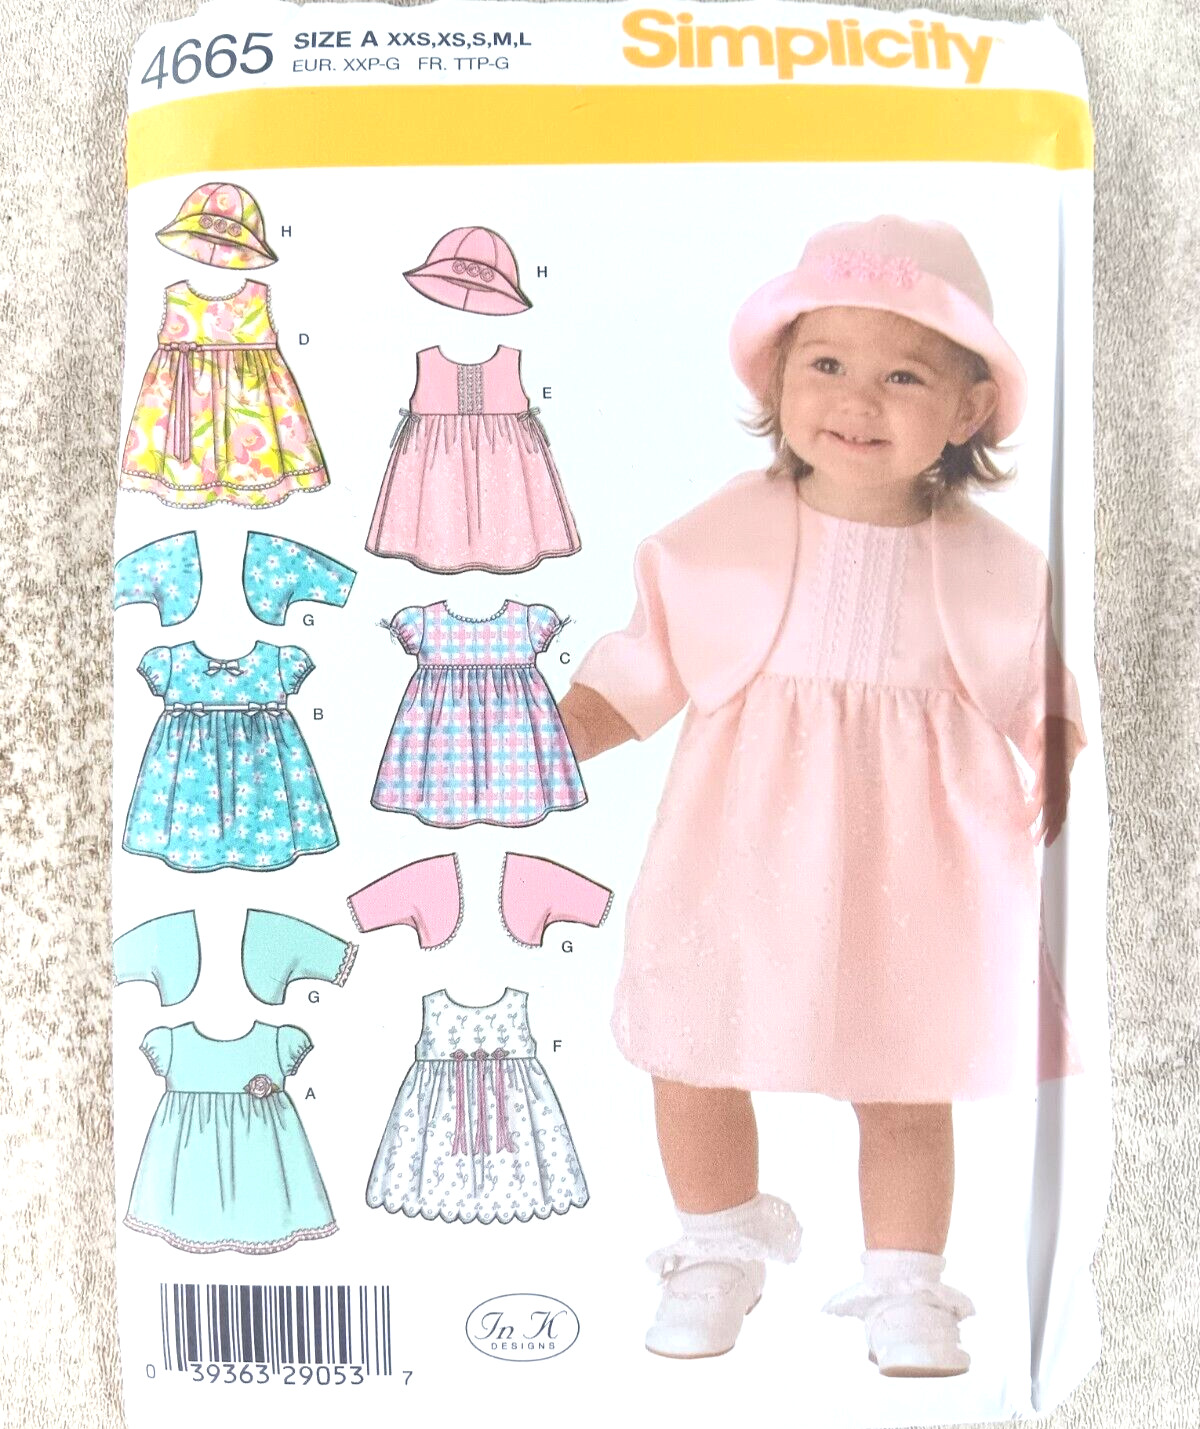 Simplicity Baby and Doll Pattern 4665 Size A, XXS, XS, S, M, L